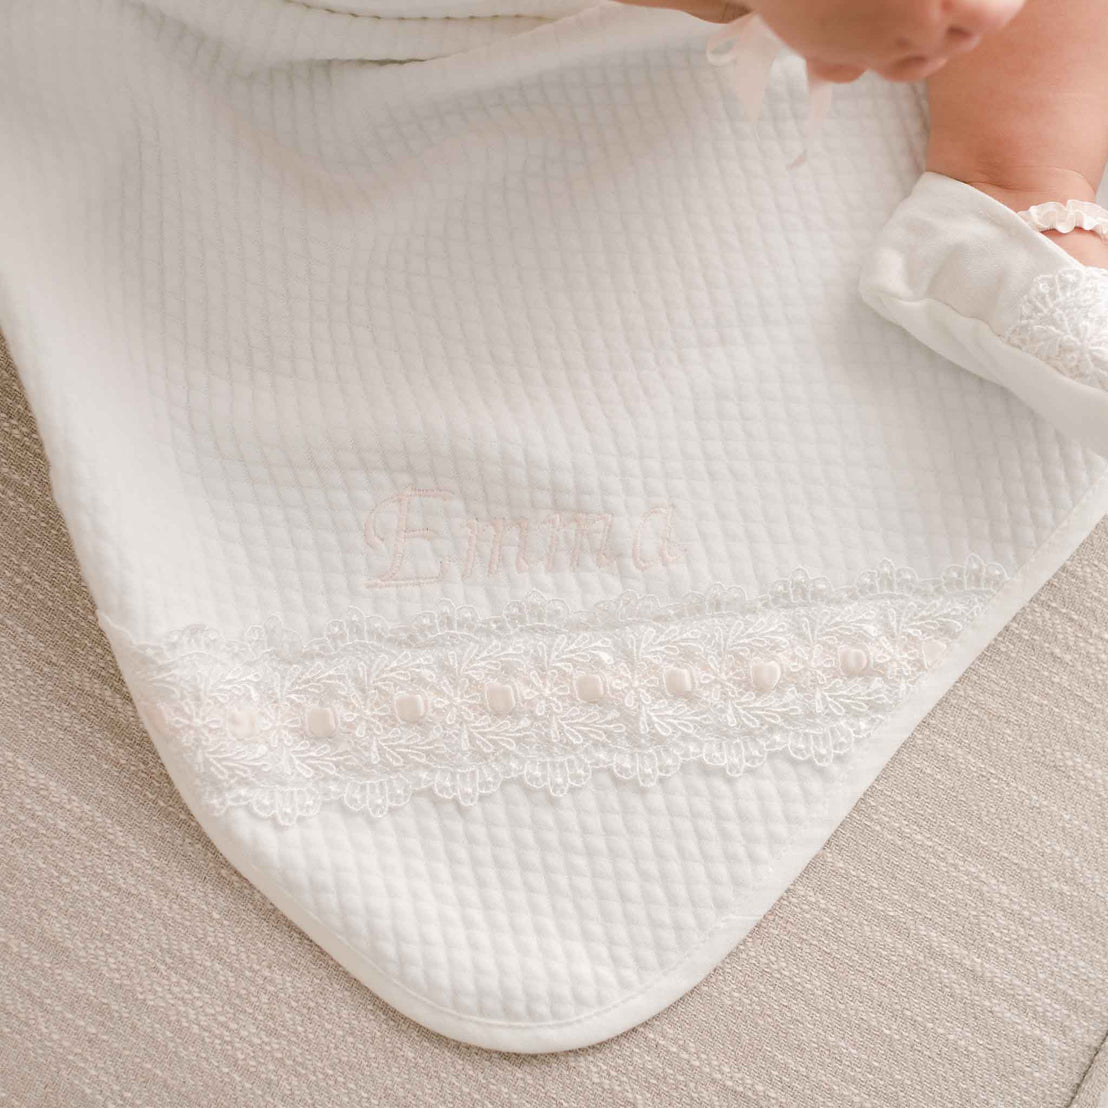 A close-up of a baby under a white blanket with lace details and the name "Emma" embroidered on it, perfect for an upscale baptism.